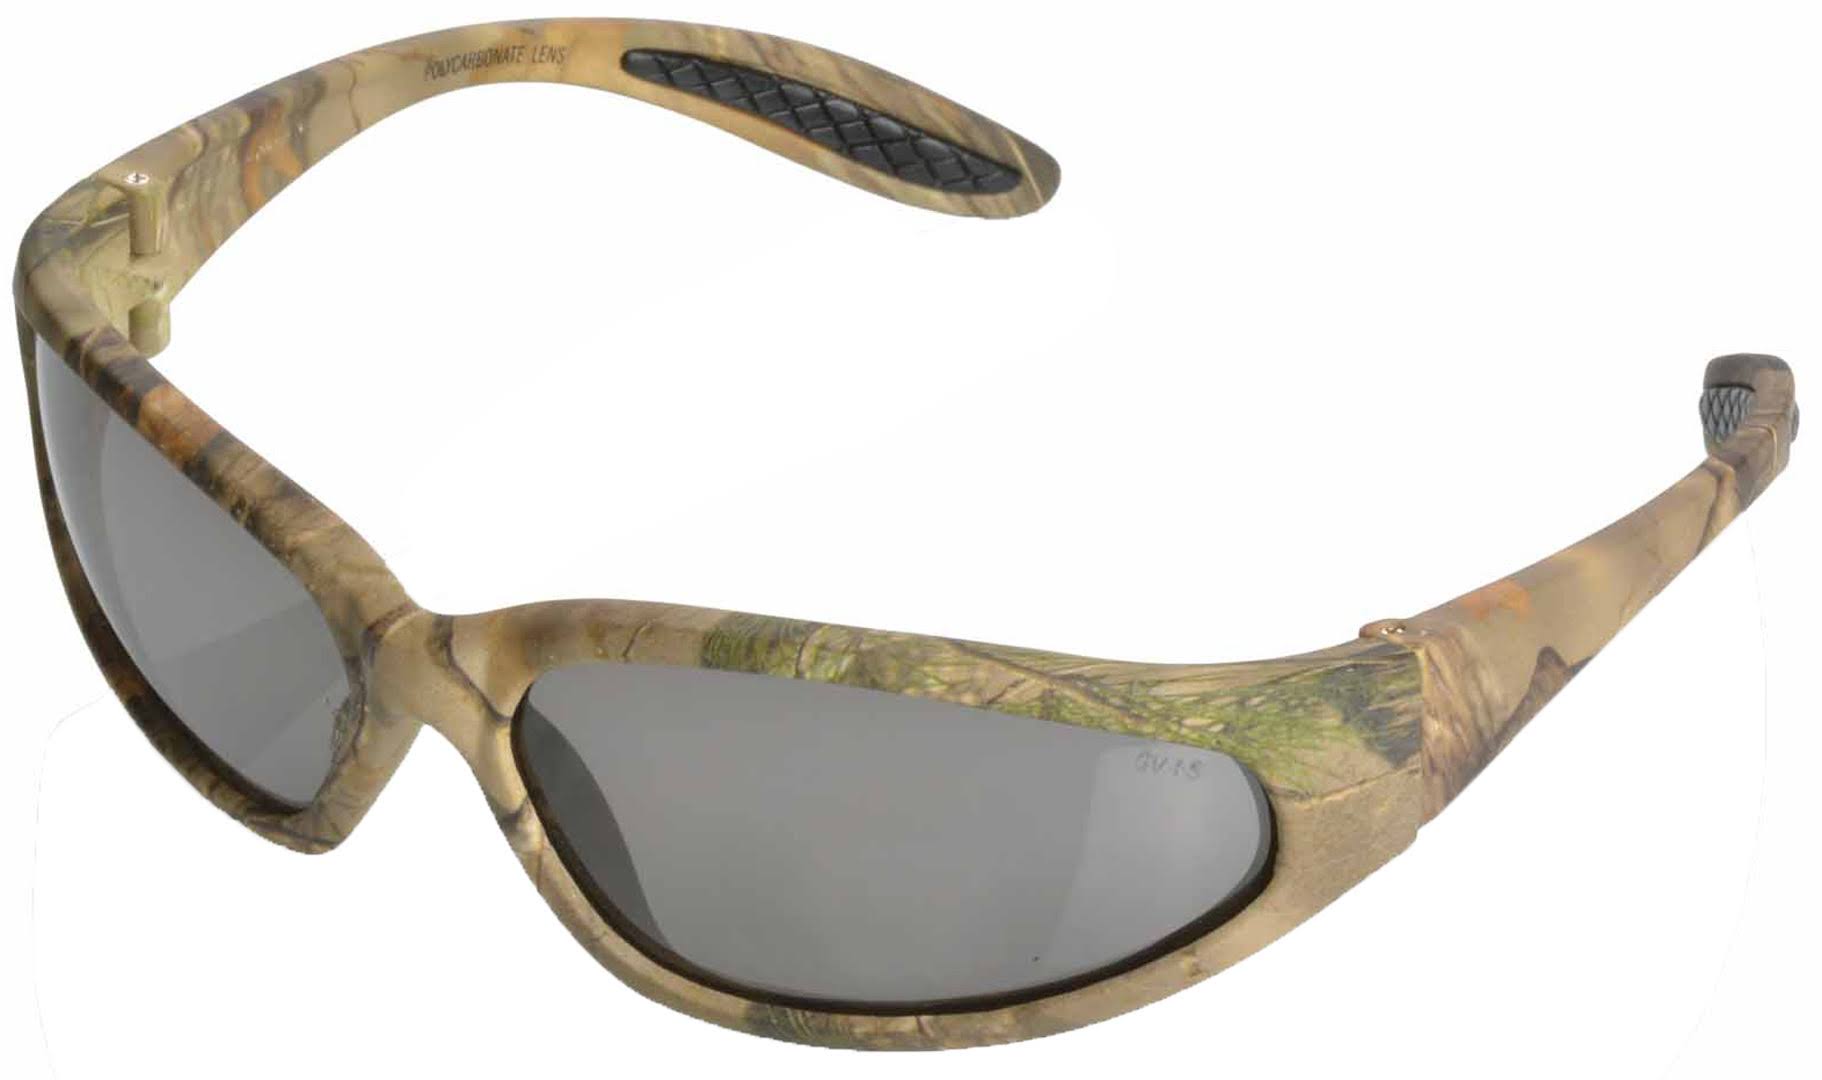 Global Vision Forest 1 Sunglasses Black One Size